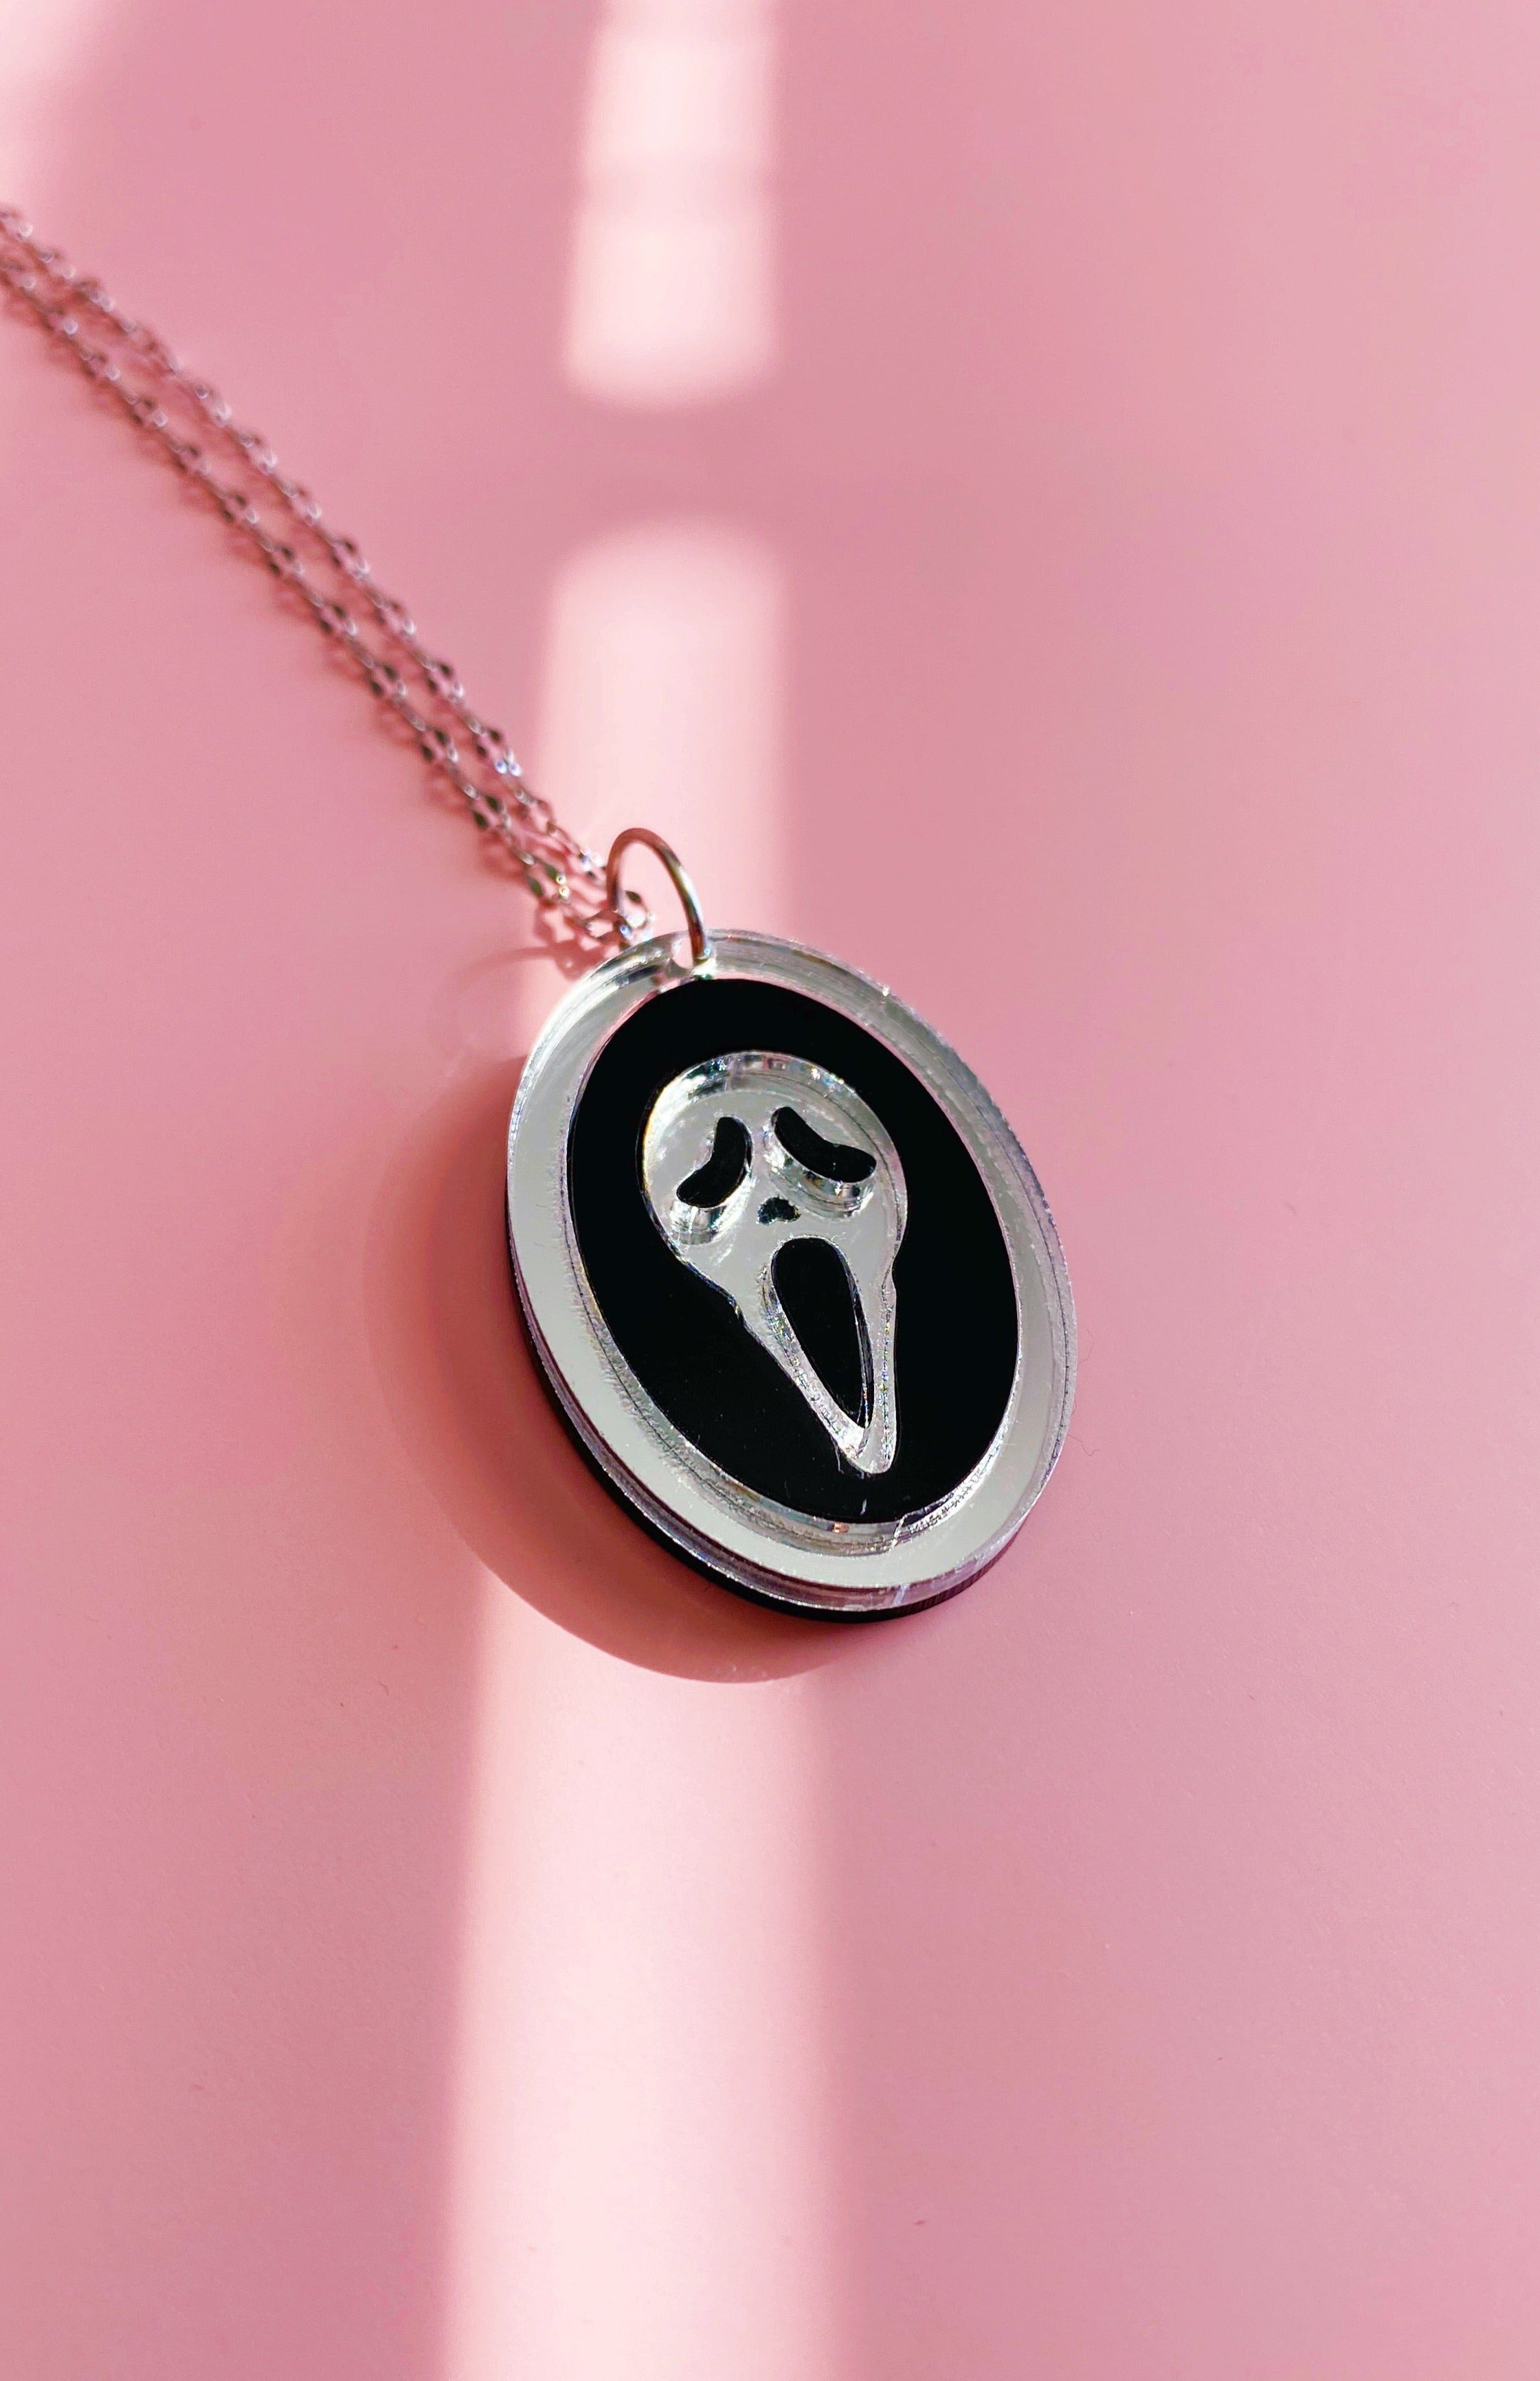 Ghost Face” necklace – Tangerine Kitty